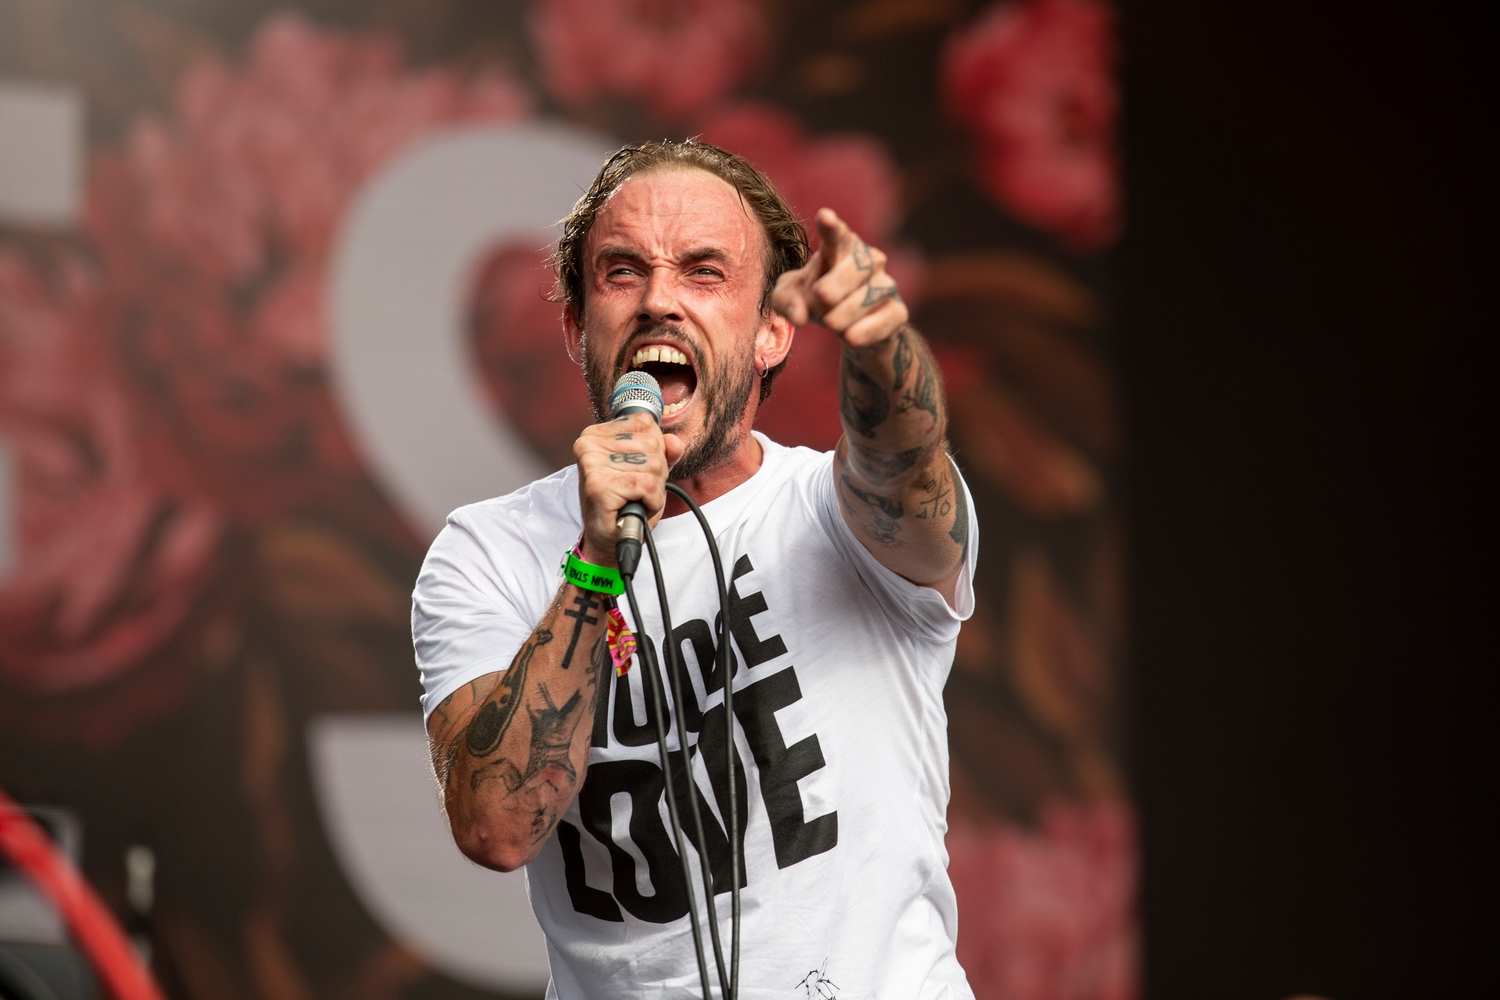 IDLES, Cut Copy, Vampire Weekend and The Chemical Brothers are headed to NOS Alive 2019